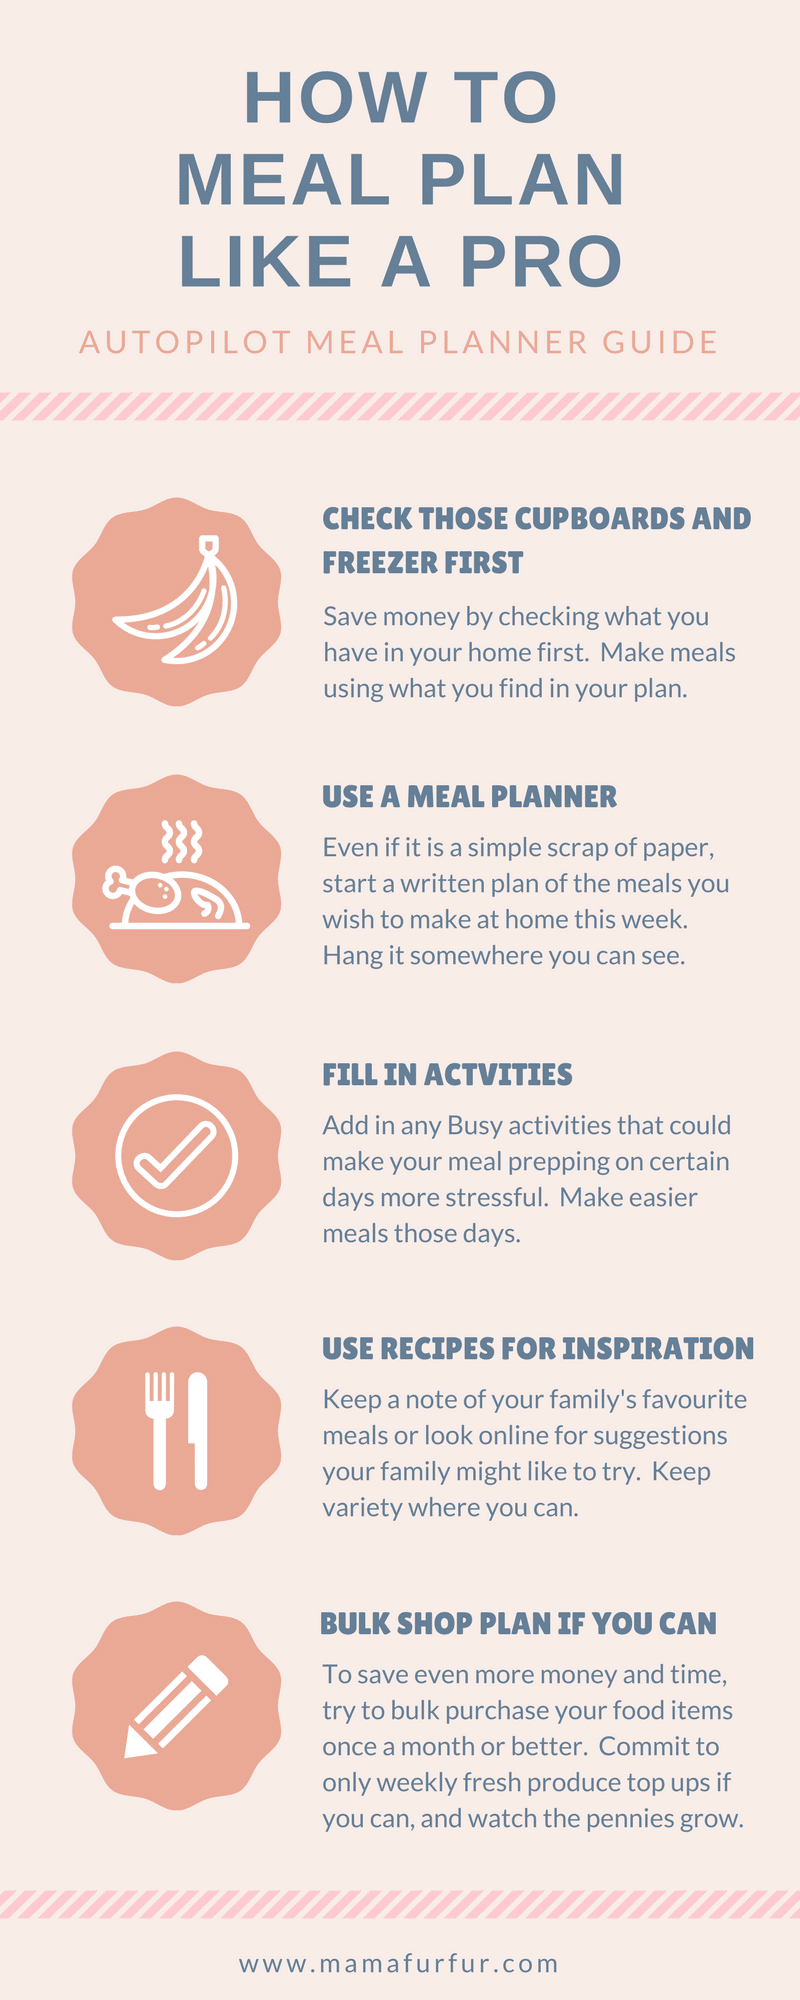 How to meal plan simple and easy meal plan tips hacks #mealplan #budgeting #debtfree #familyfood #cookingtips